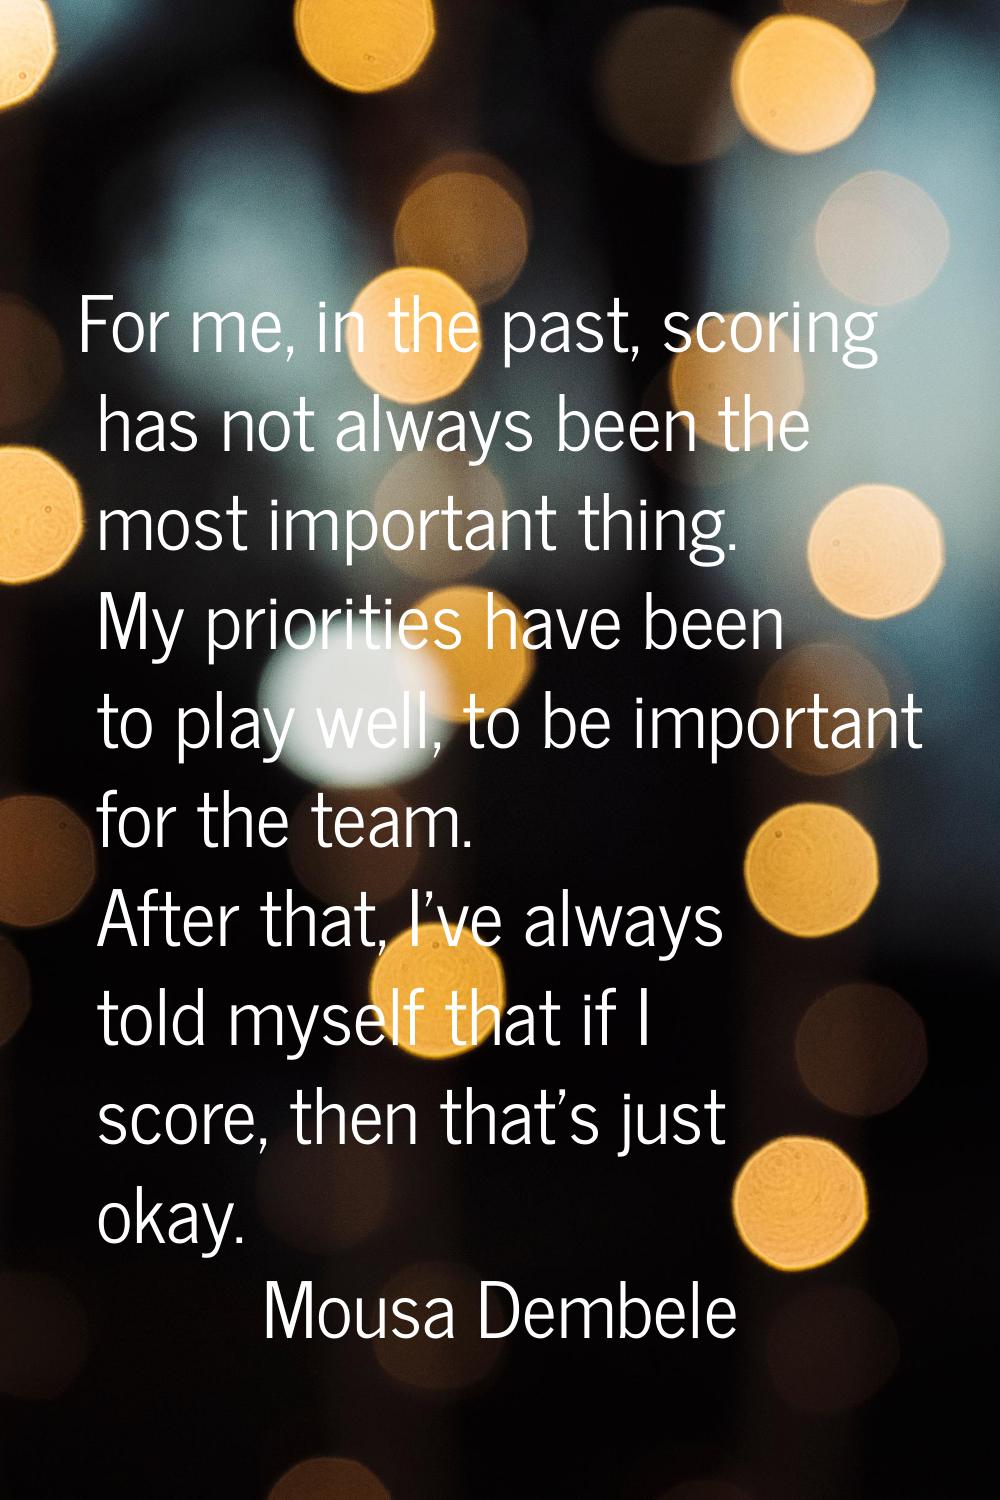 For me, in the past, scoring has not always been the most important thing. My priorities have been 